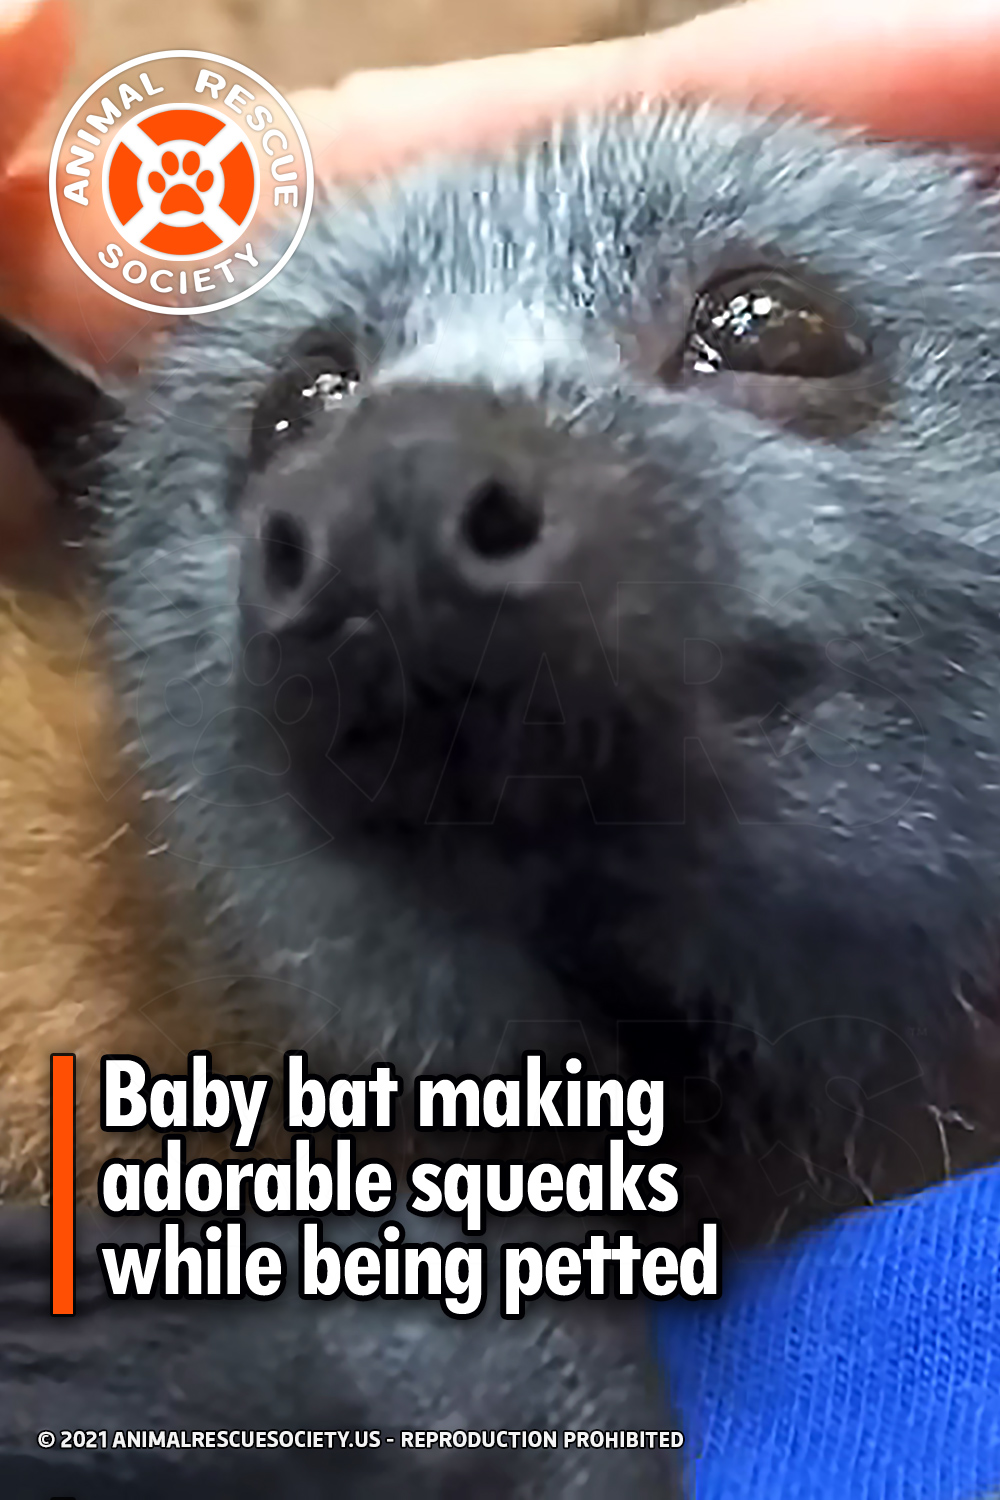 Baby bat making adorable squeaks while being petted